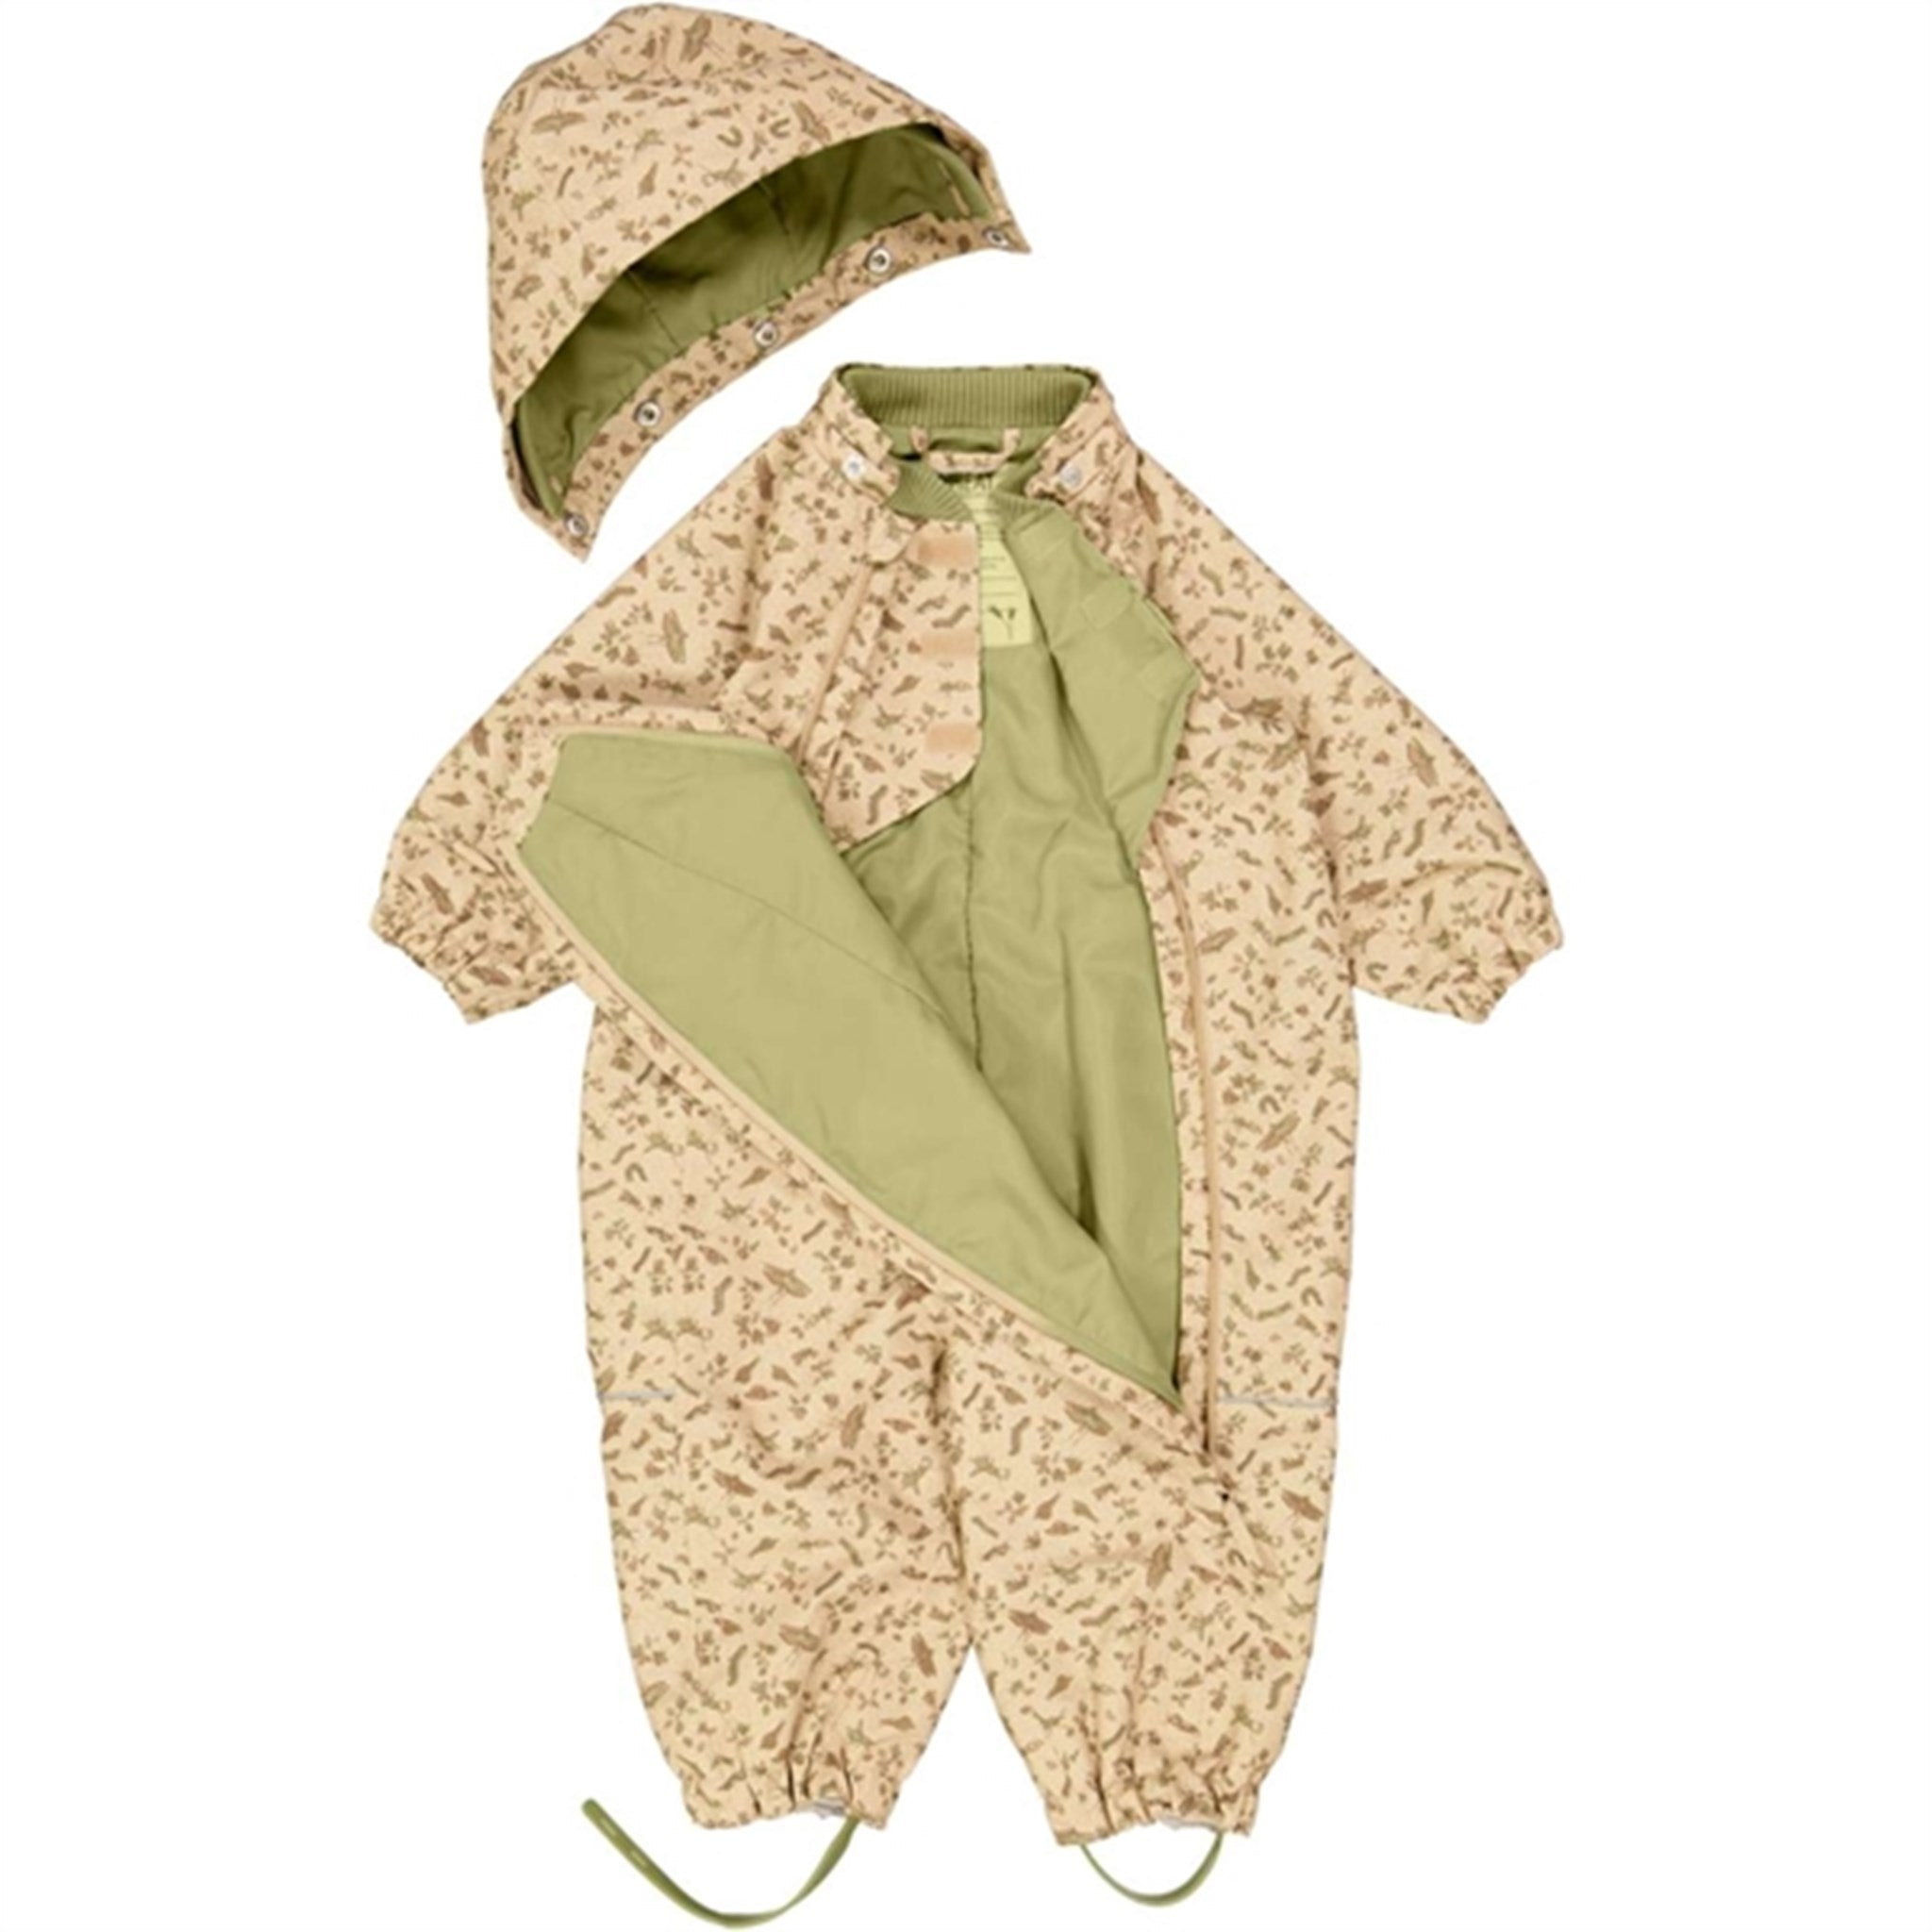 Wheat Outdoor Suit Olly Tech Sand Insects 4